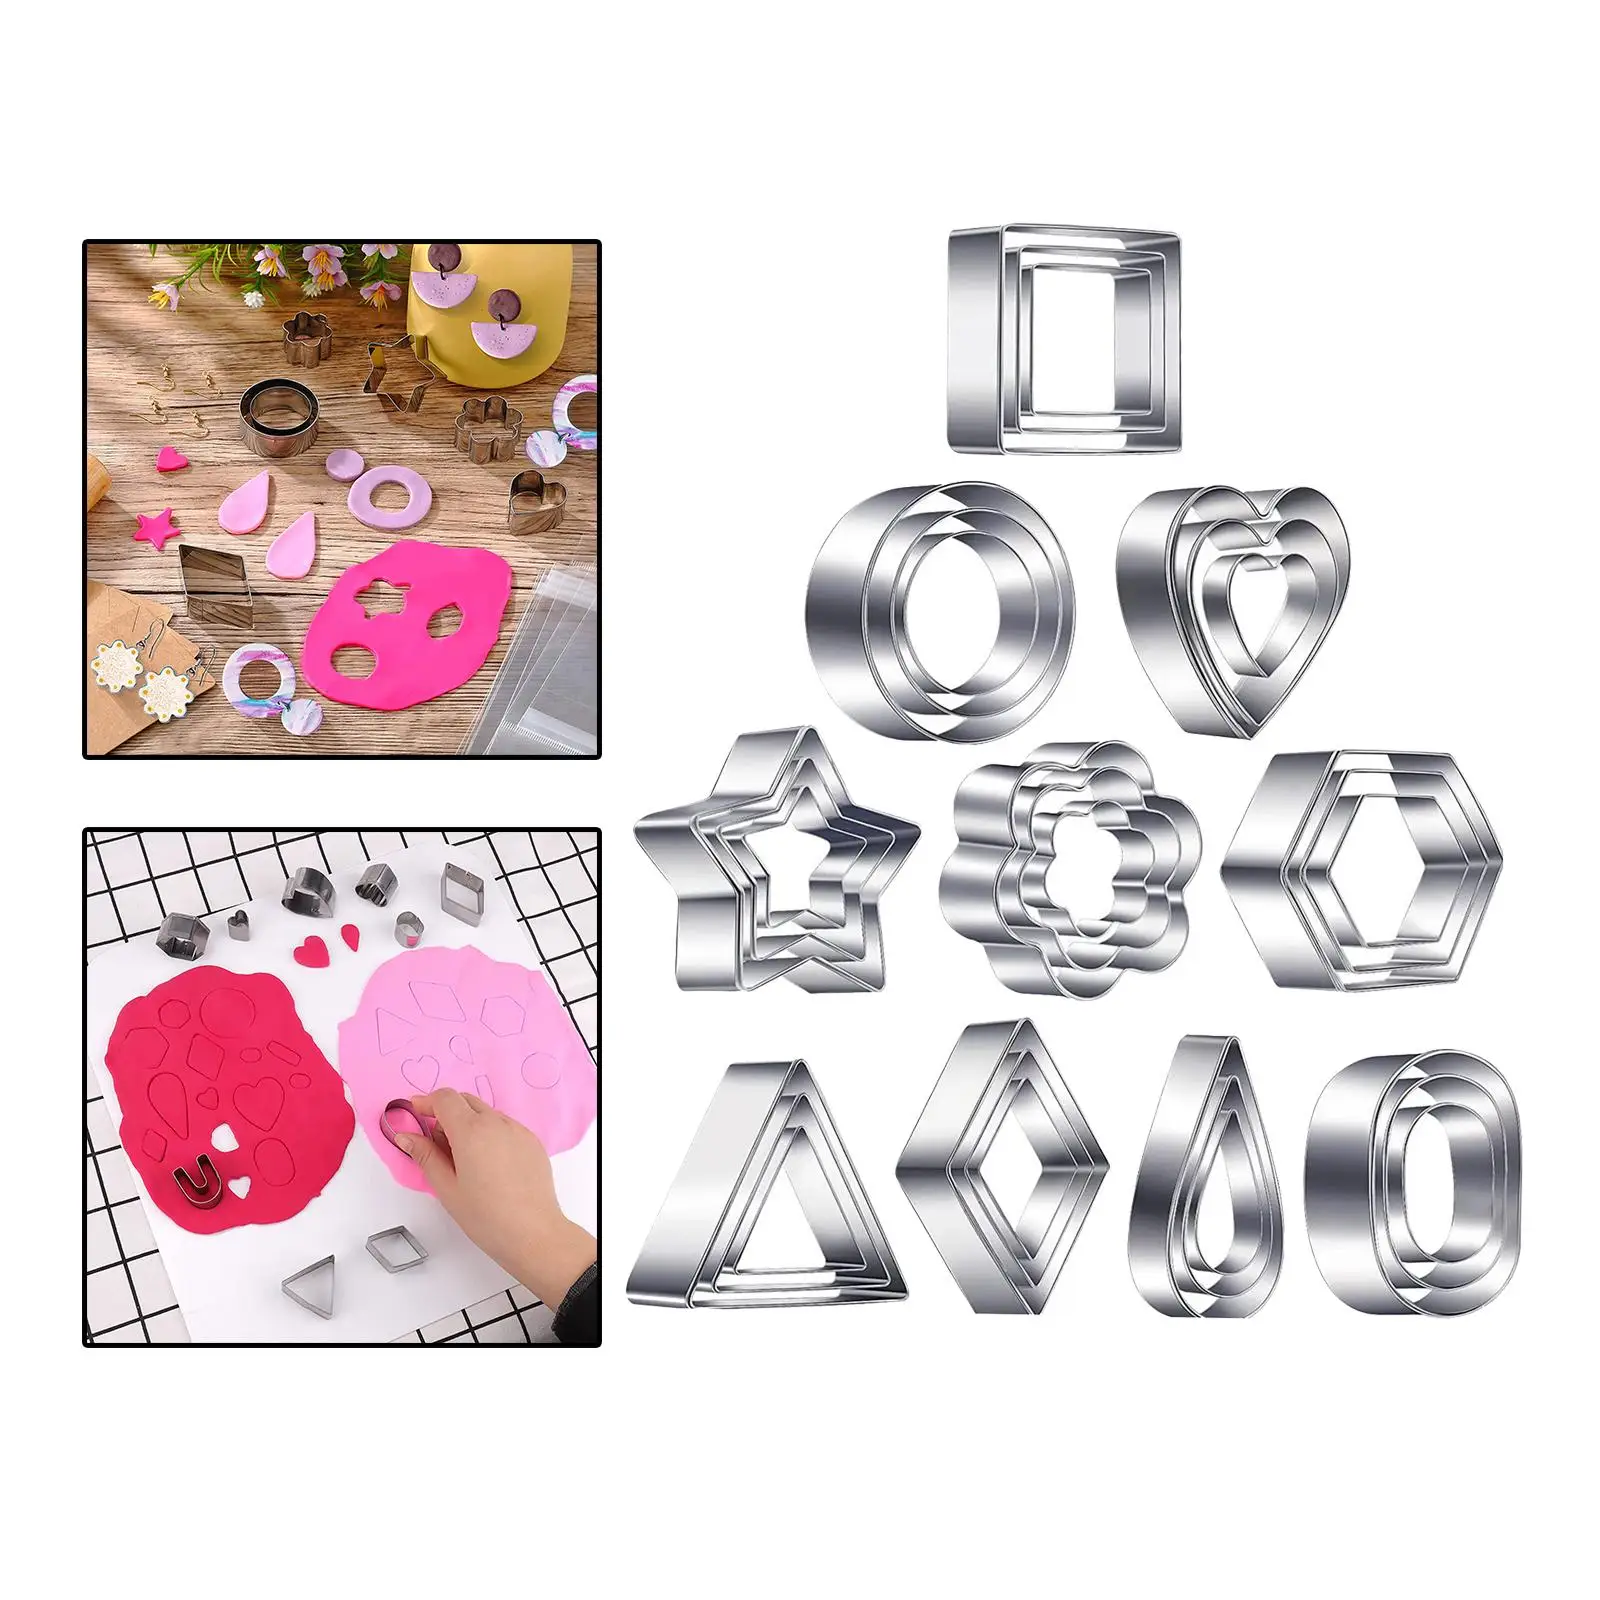 Handmade Polymer Clay Cutter Punch Mold DIY Tool Art Supplies Stainless Steel for Jewelry Making Fondant Cake